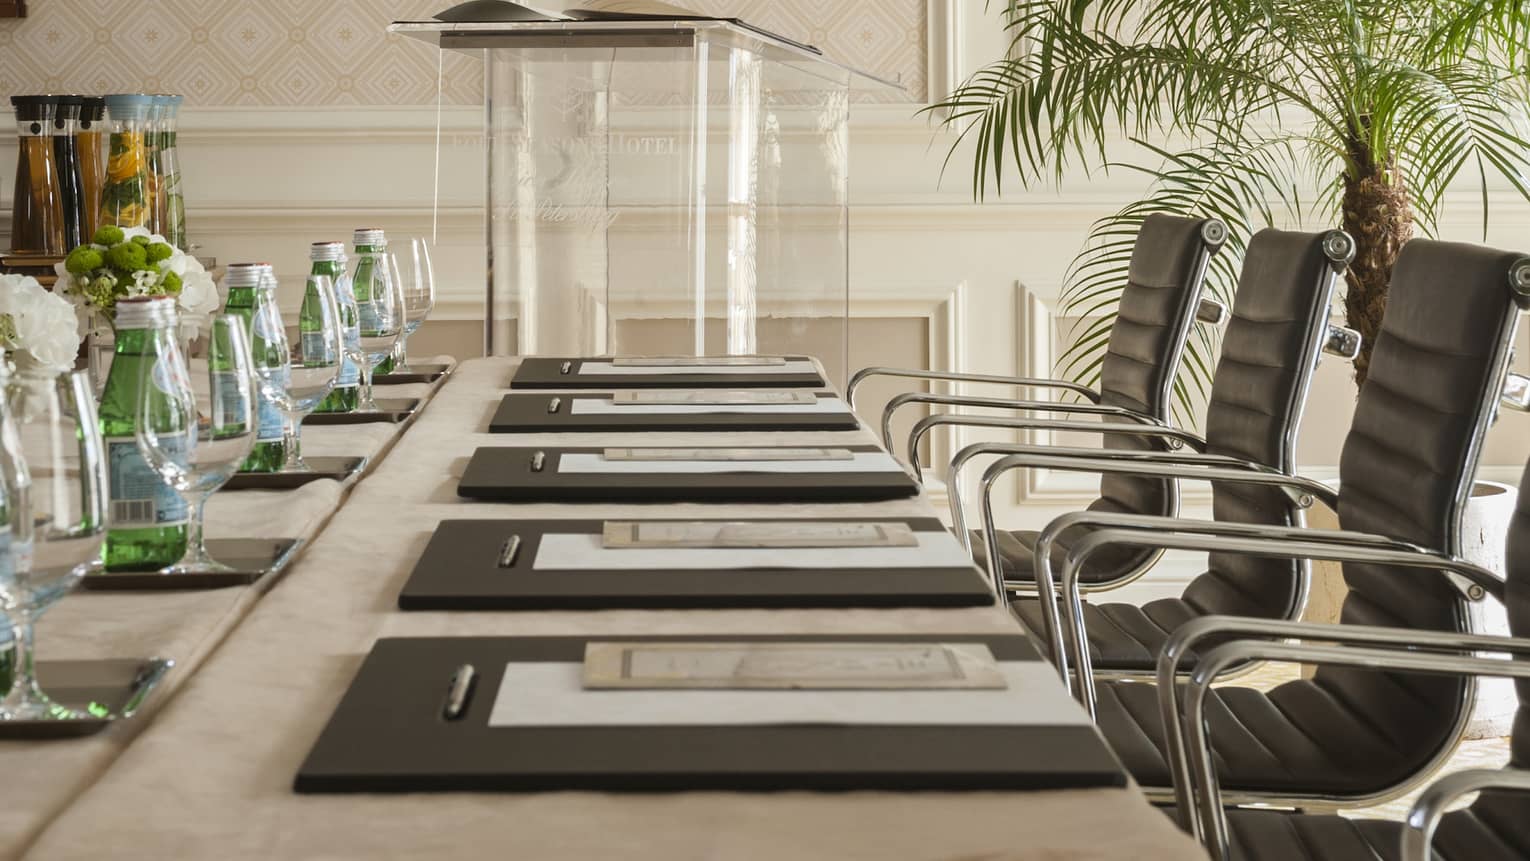 Phipps Room elegant boardroom meeting table lined with black executive chairs